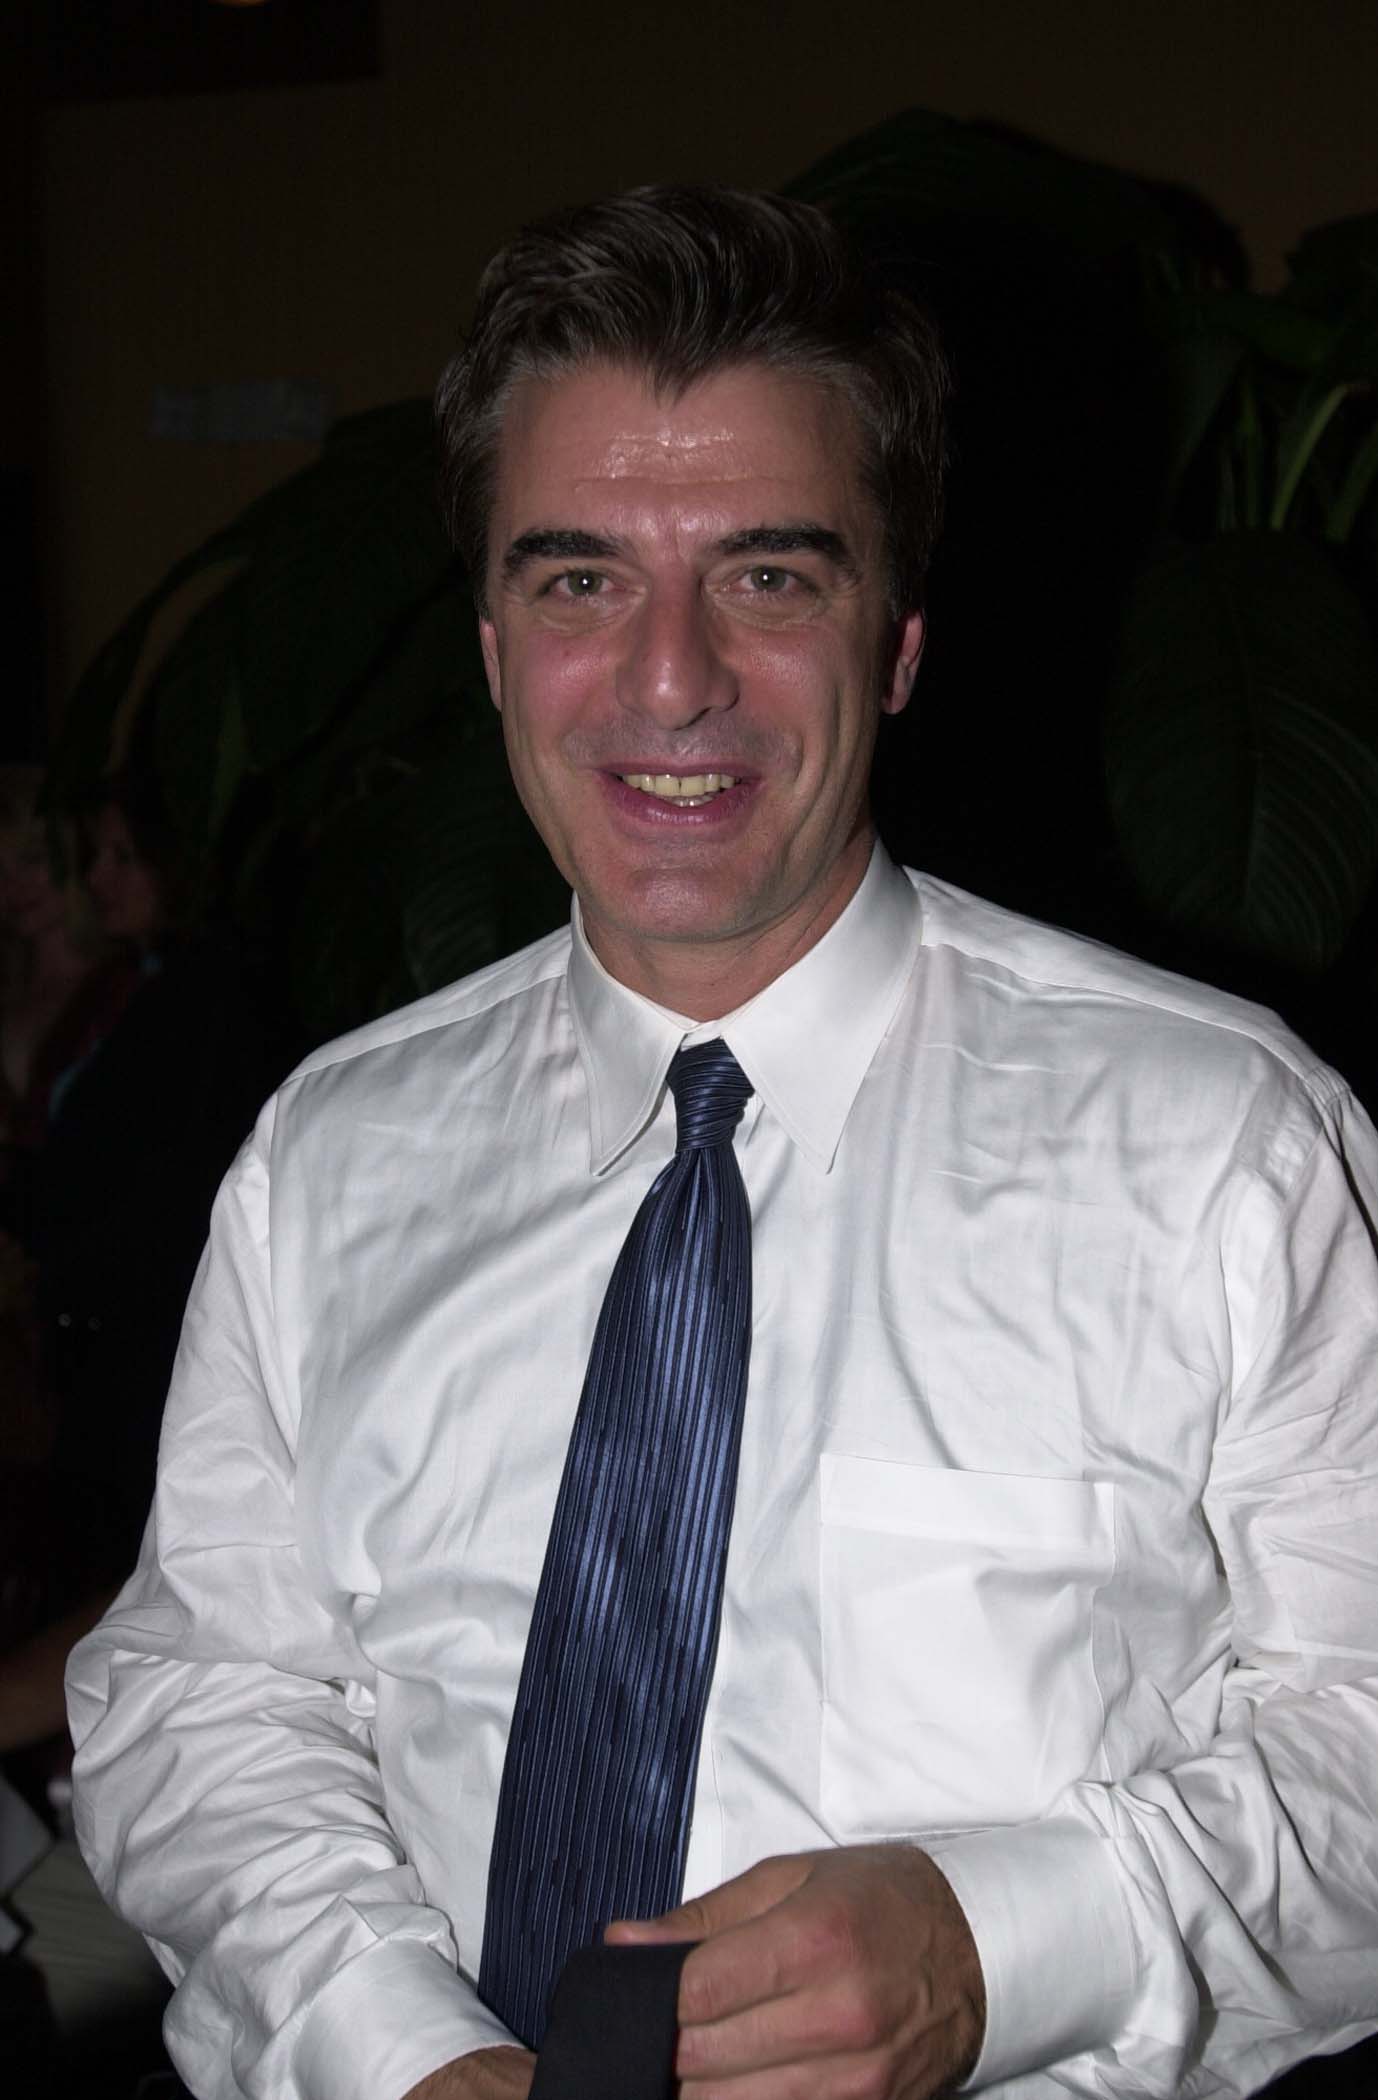 Chris Noth in 2000 | Source: Getty Images